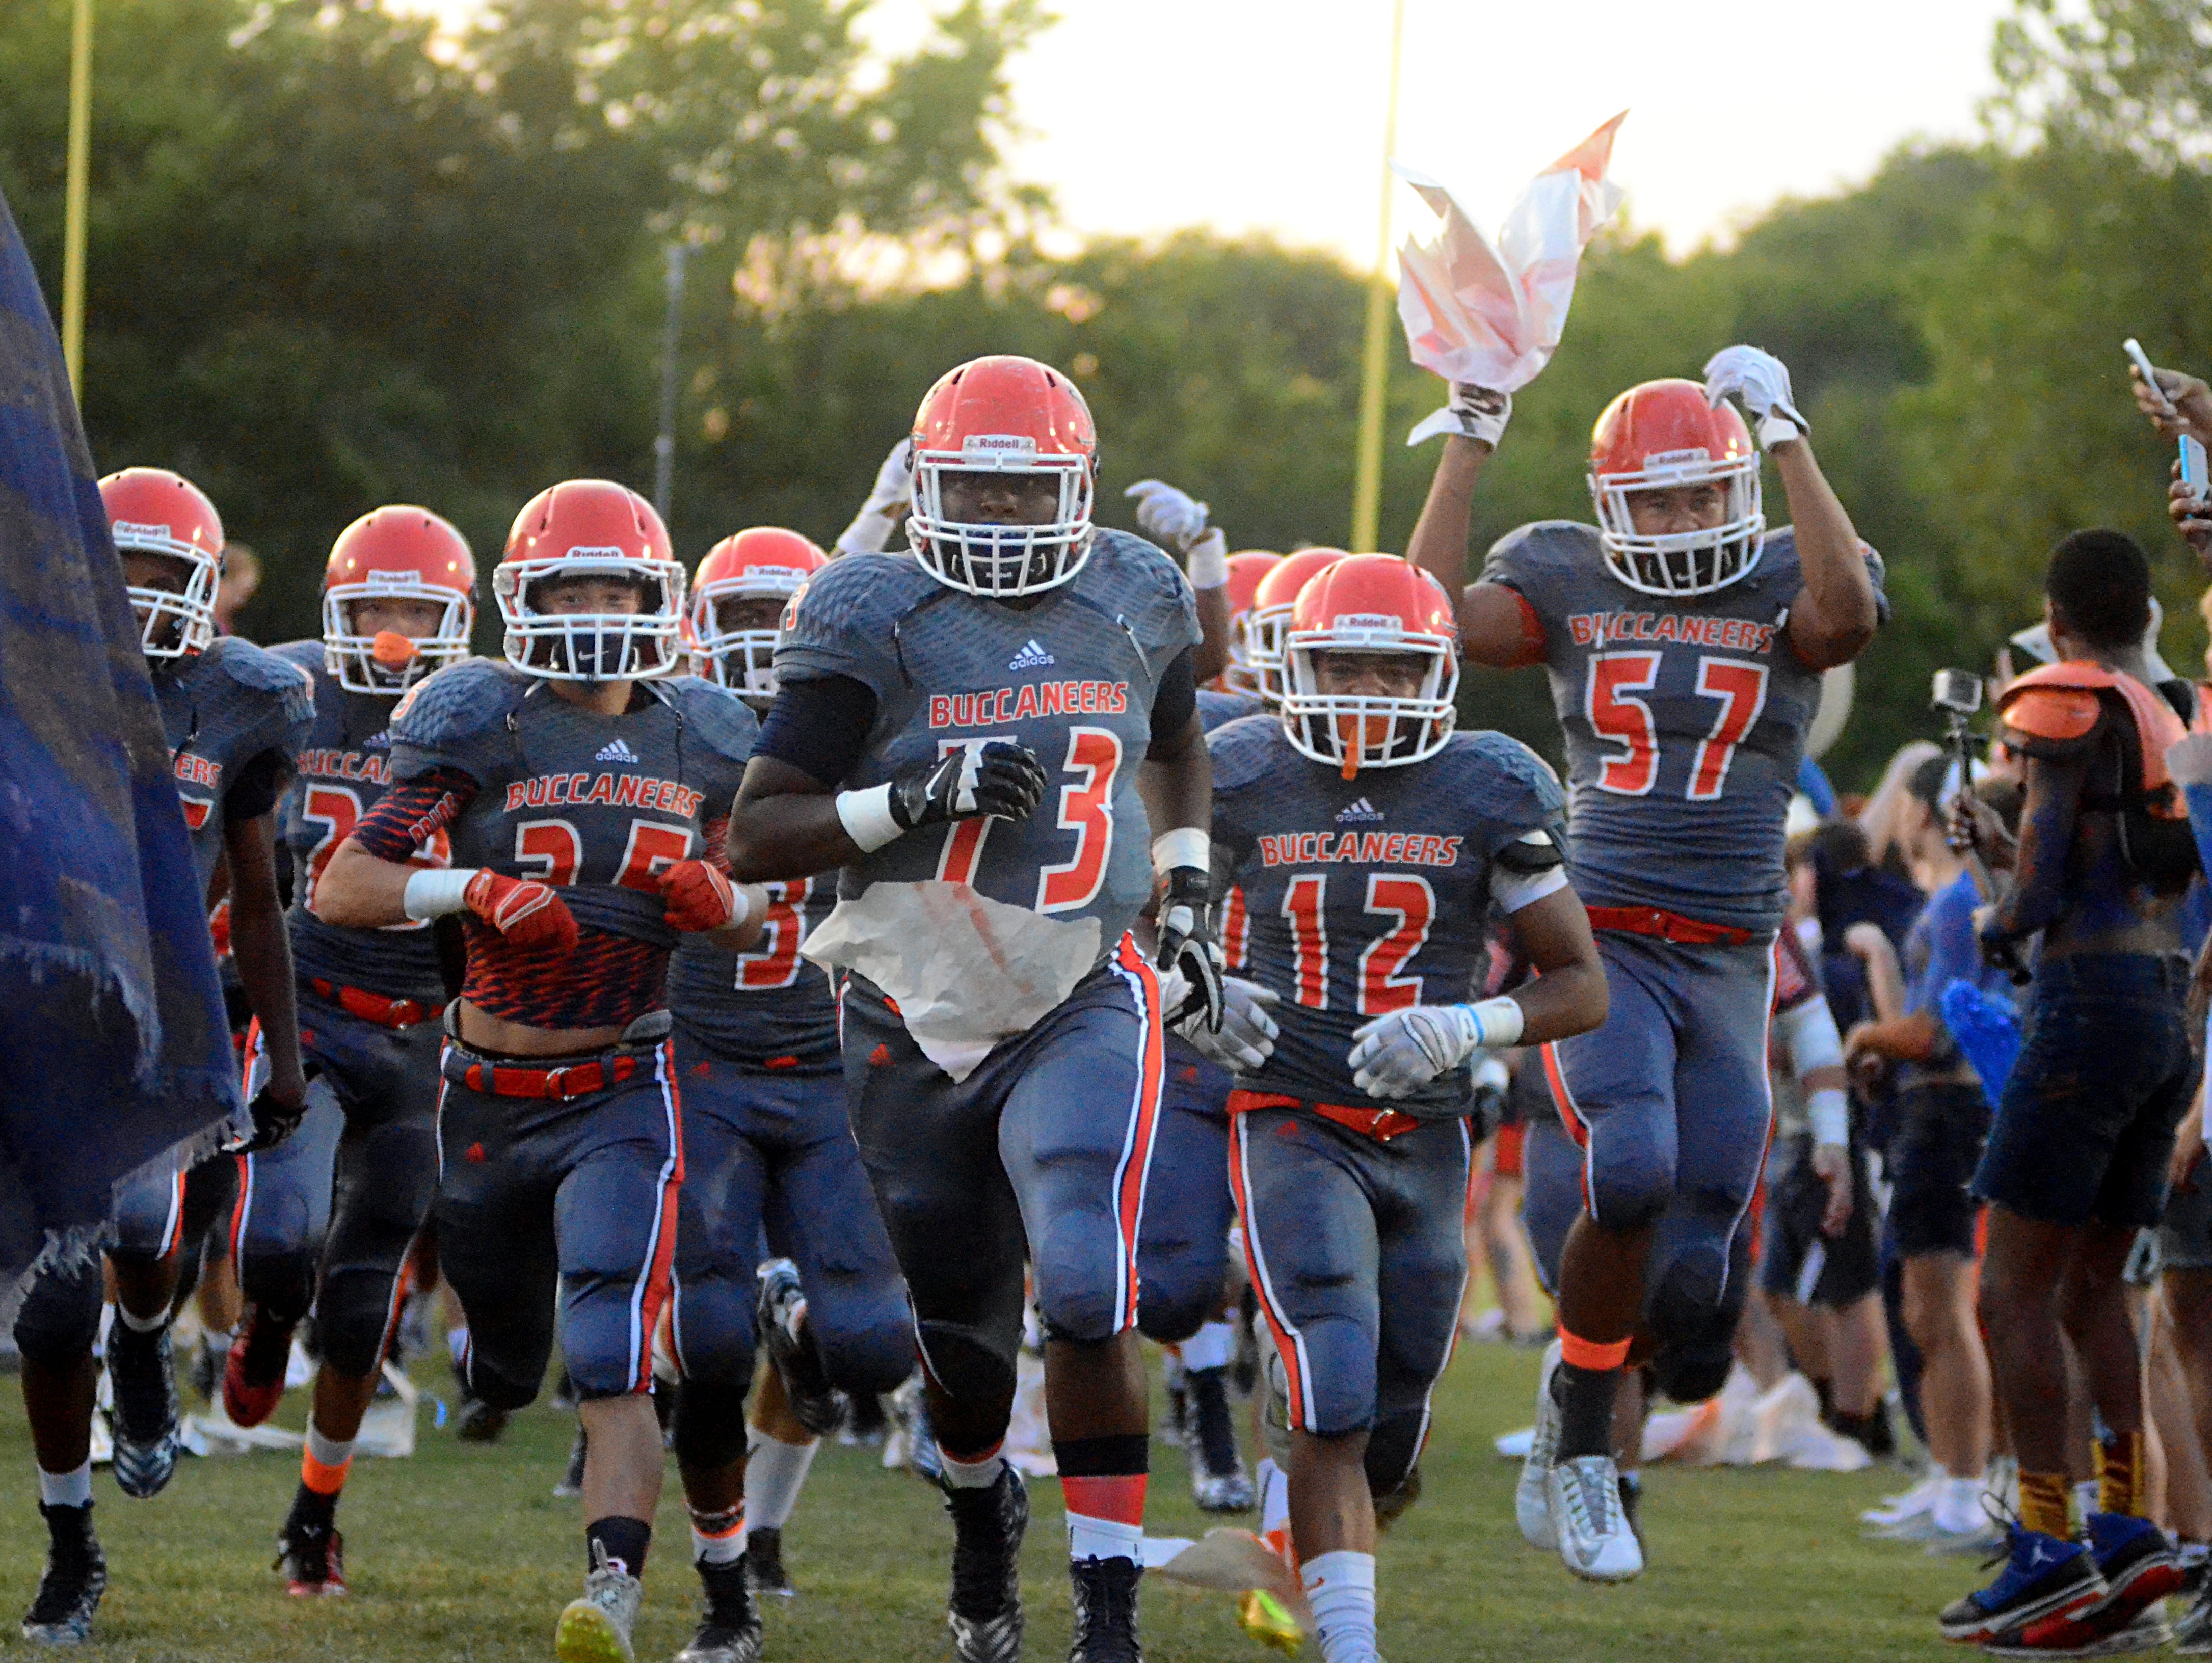 Beech players run onto the field prior to last season’s game against Rossview. Beech travels to Rossview in the second week of the season.